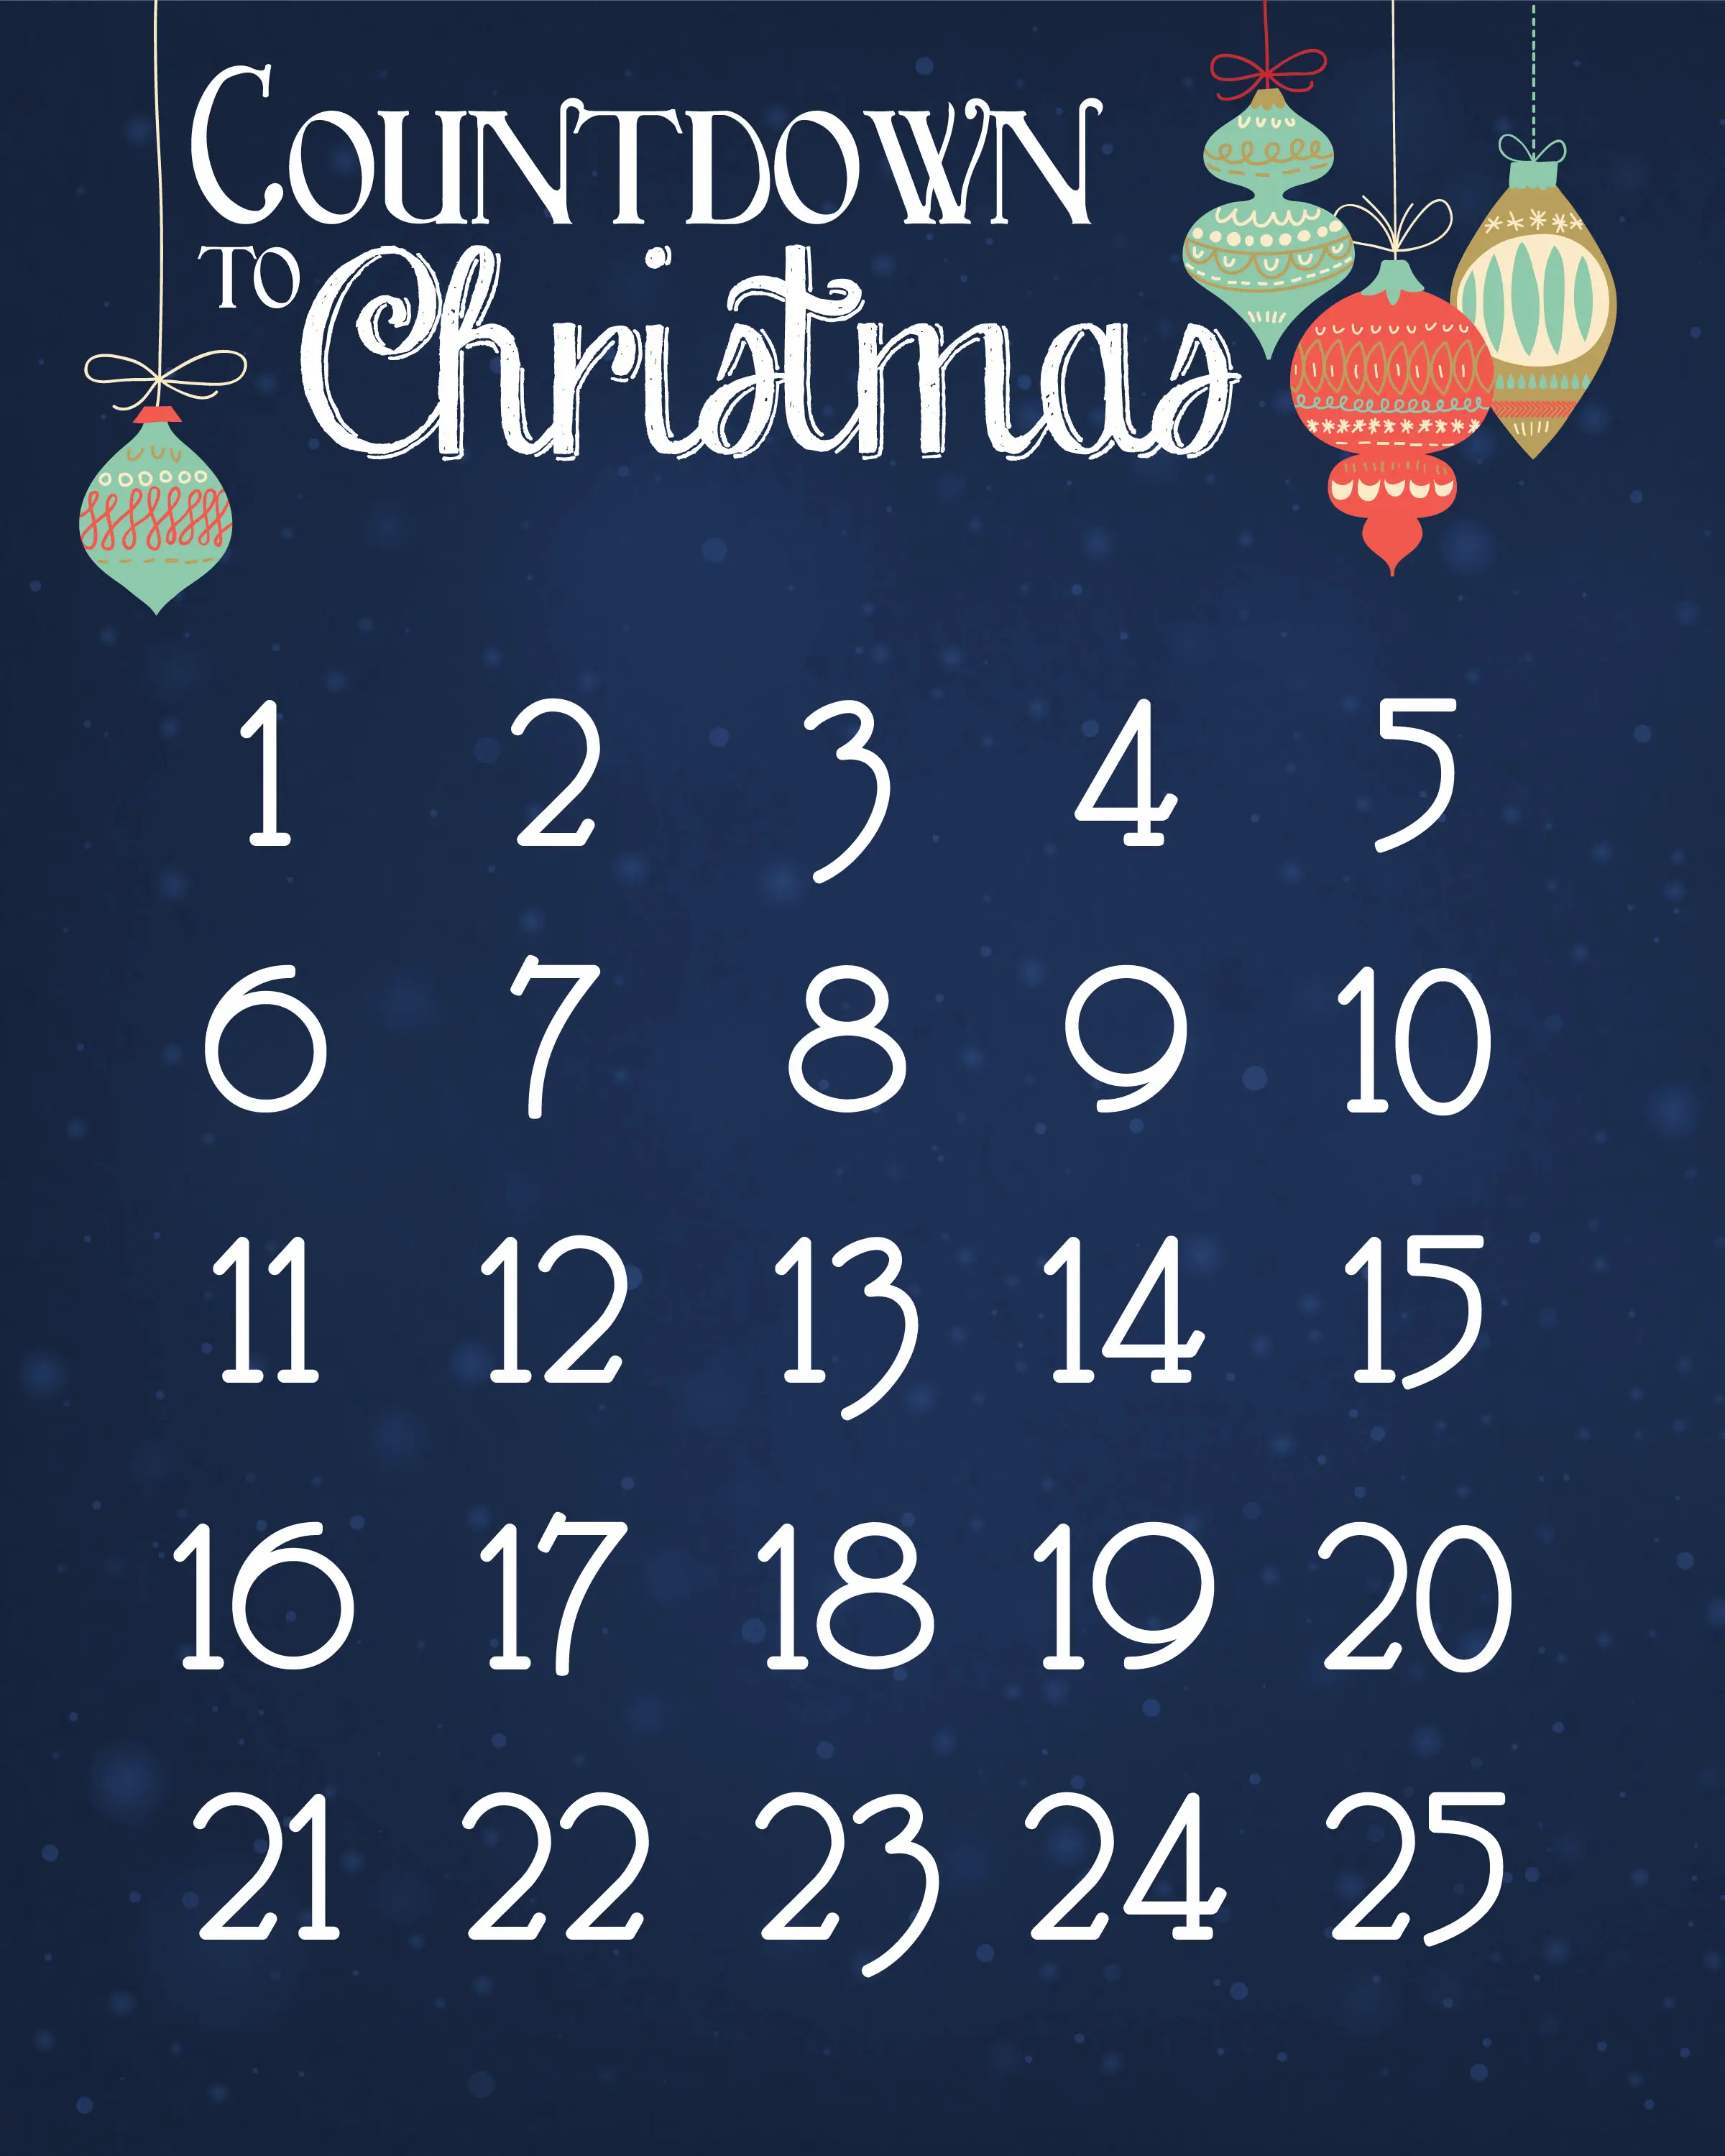 22 Awesome Christmas Countdown Calendars Kitty Baby Love